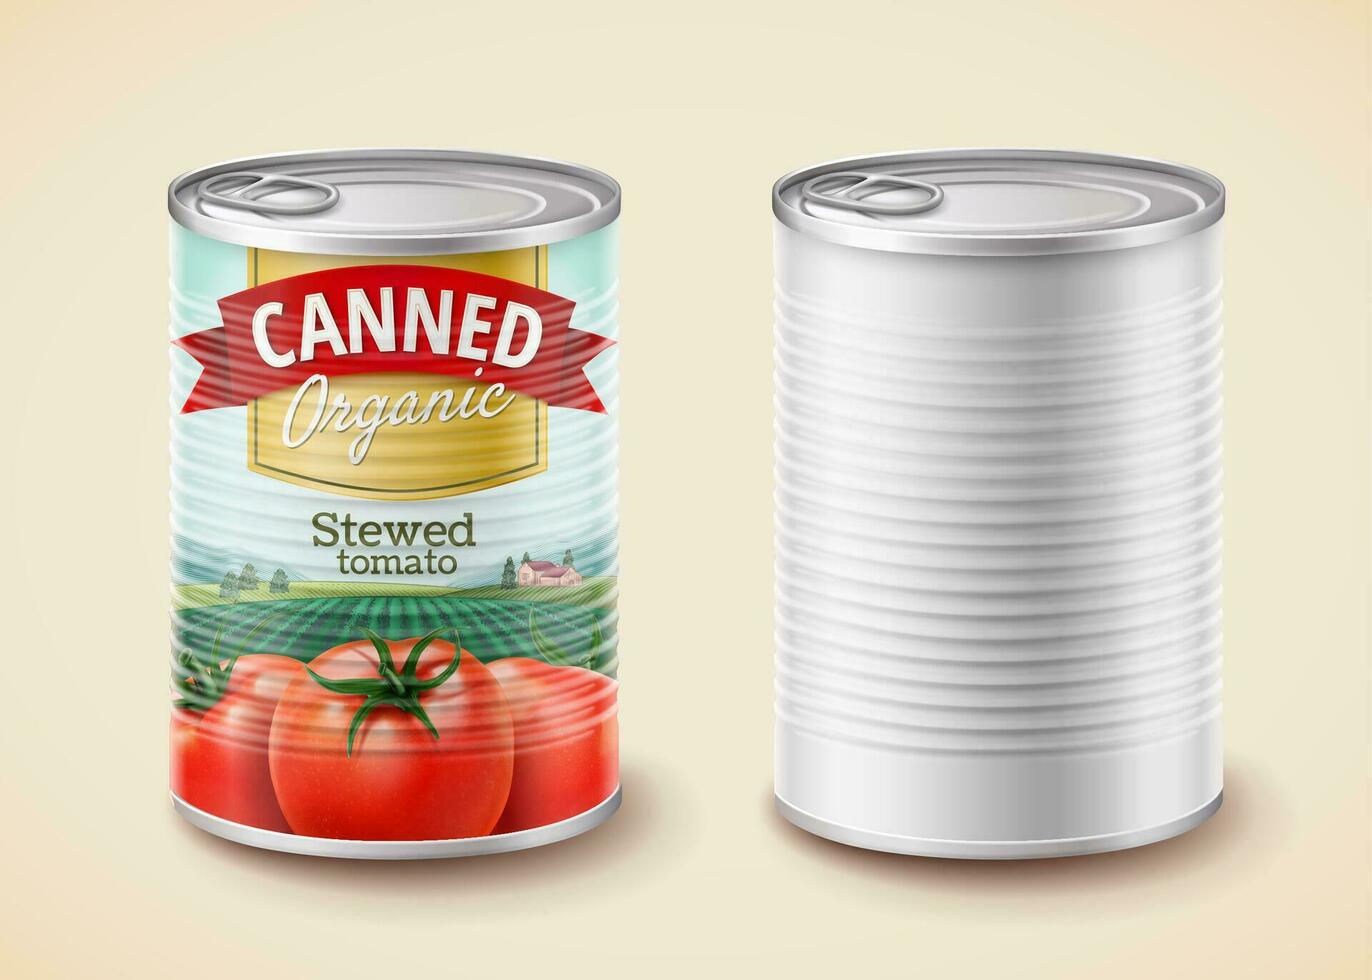 Canned stewed tomato package design in 3d illustration vector